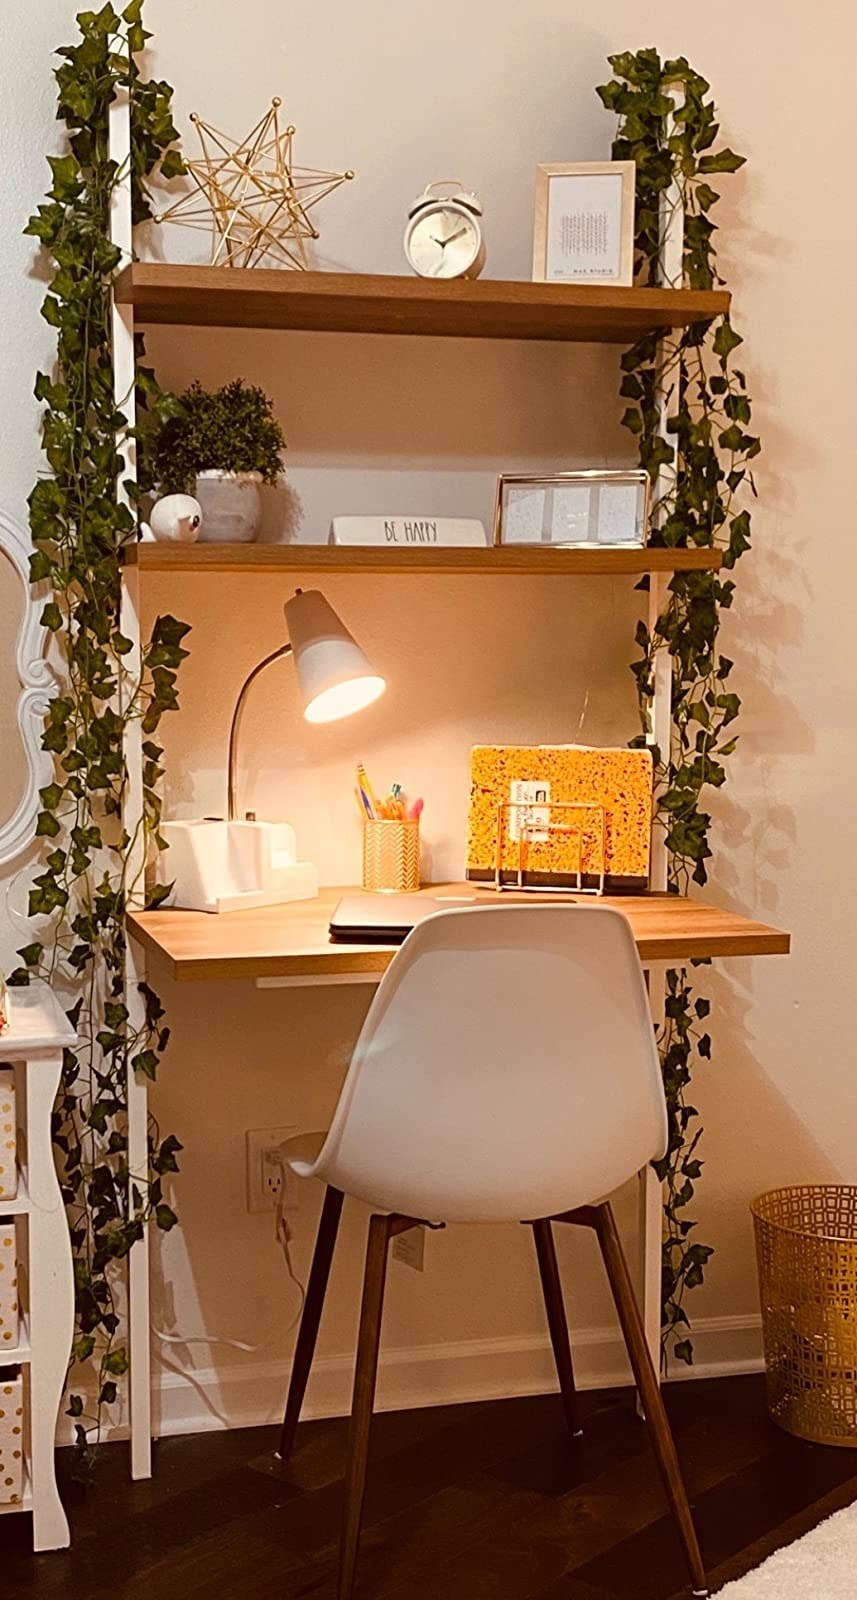 Revamp your home office in May with these cool gadgets and accessories »  Gadget Flow